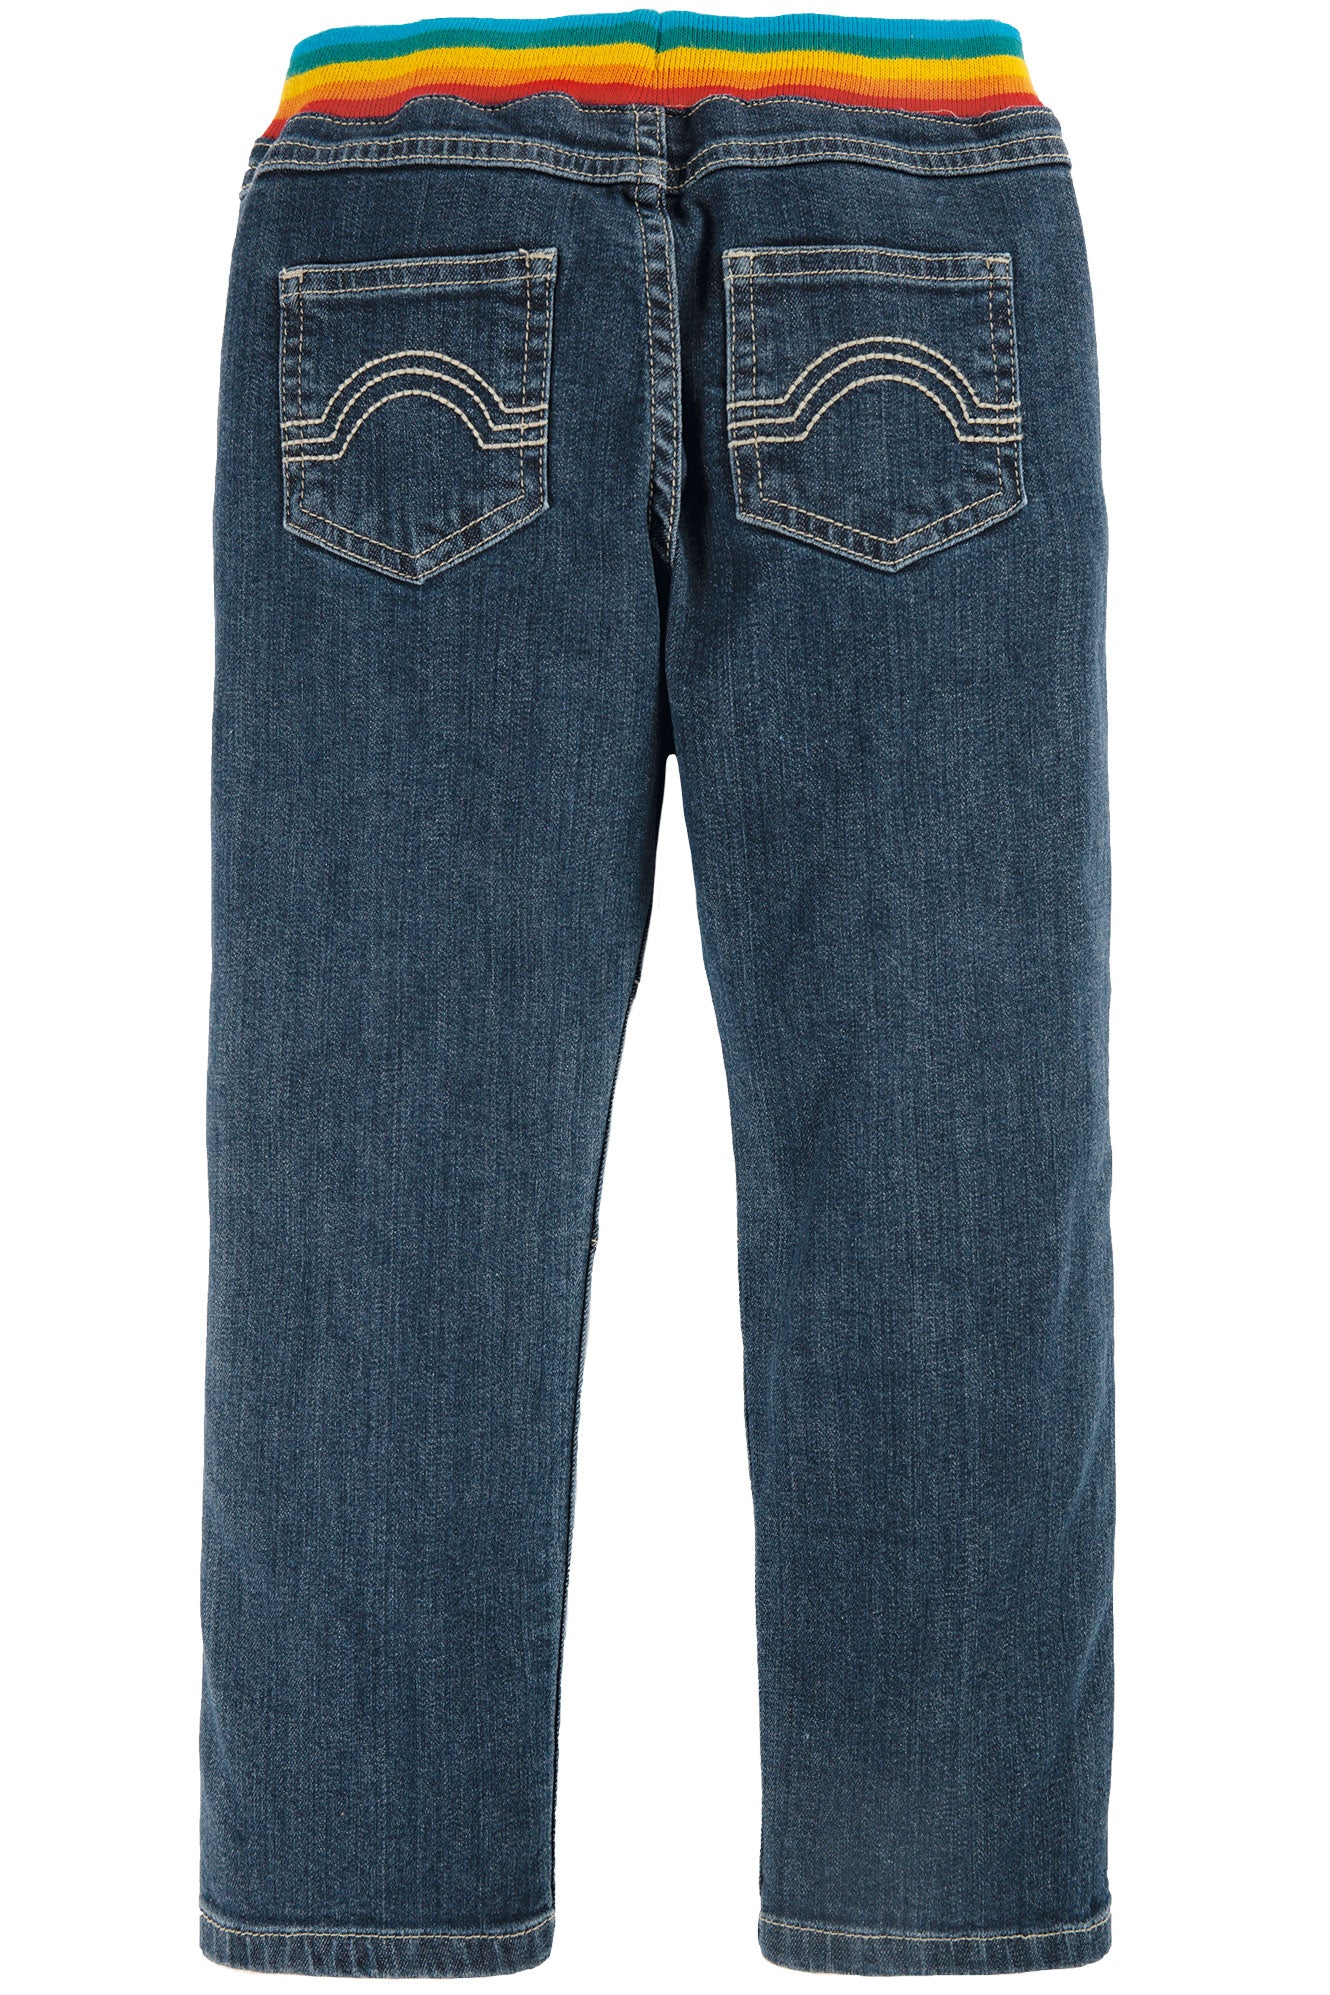 Cody Comfy Jeans